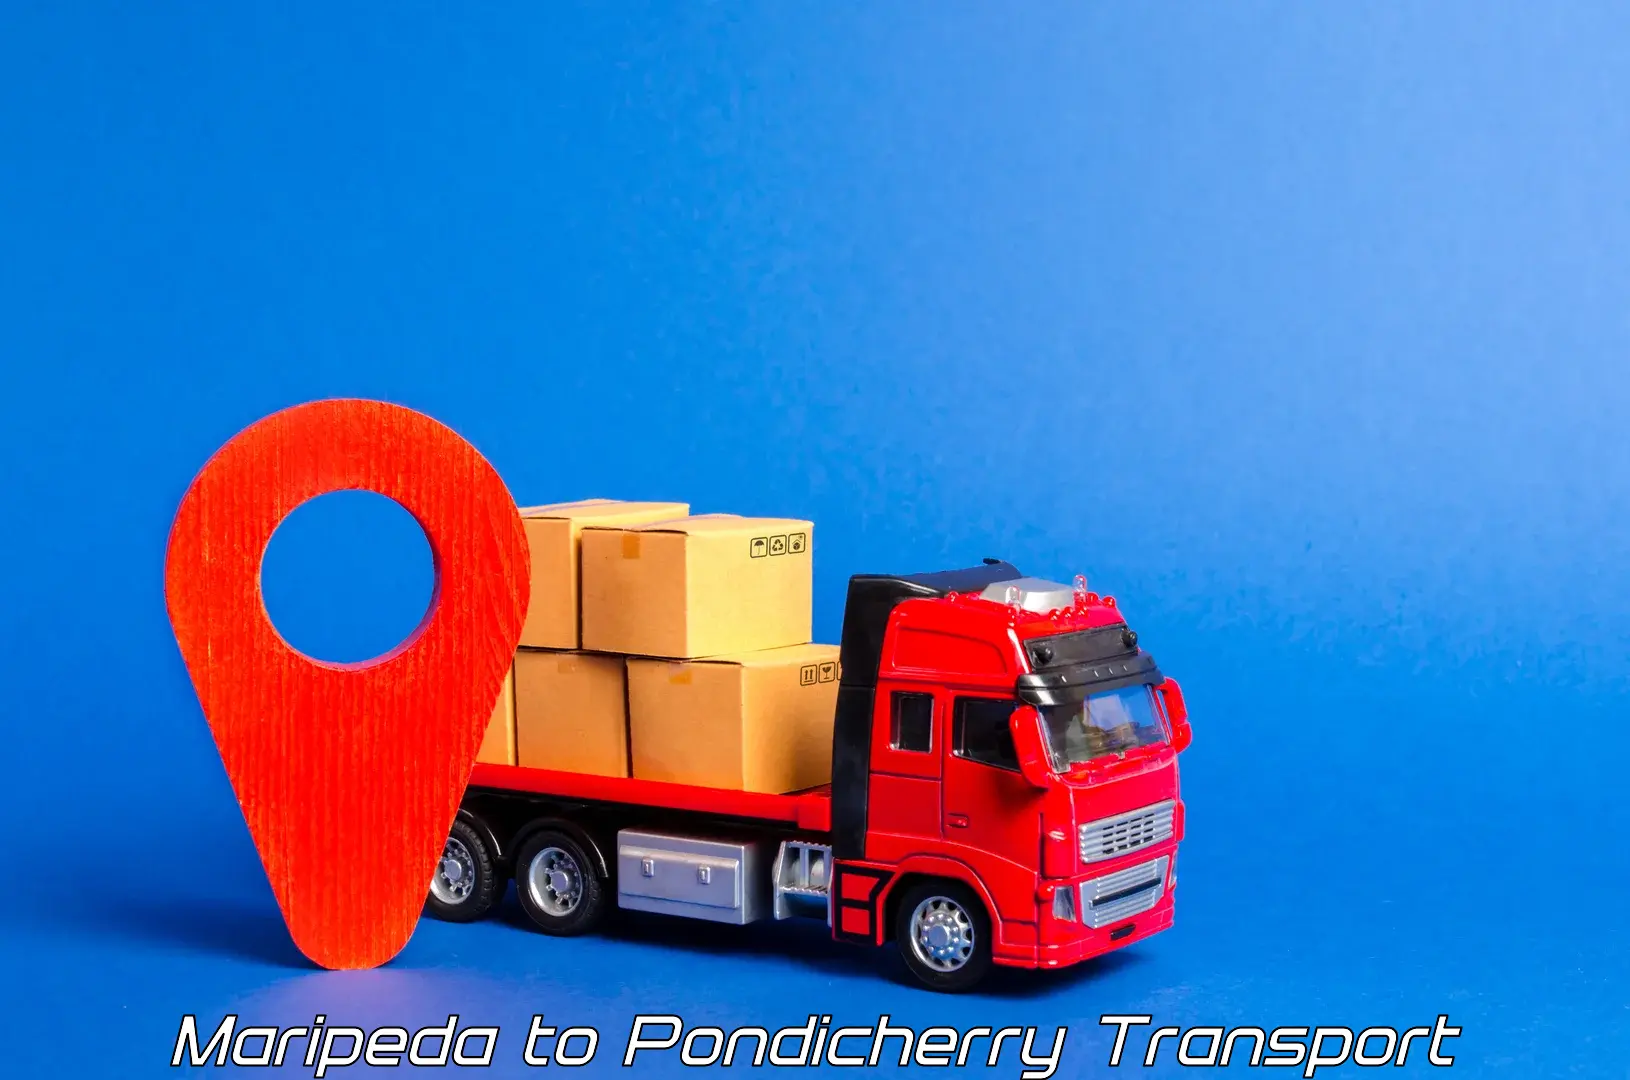 Transport bike from one state to another Maripeda to Pondicherry University